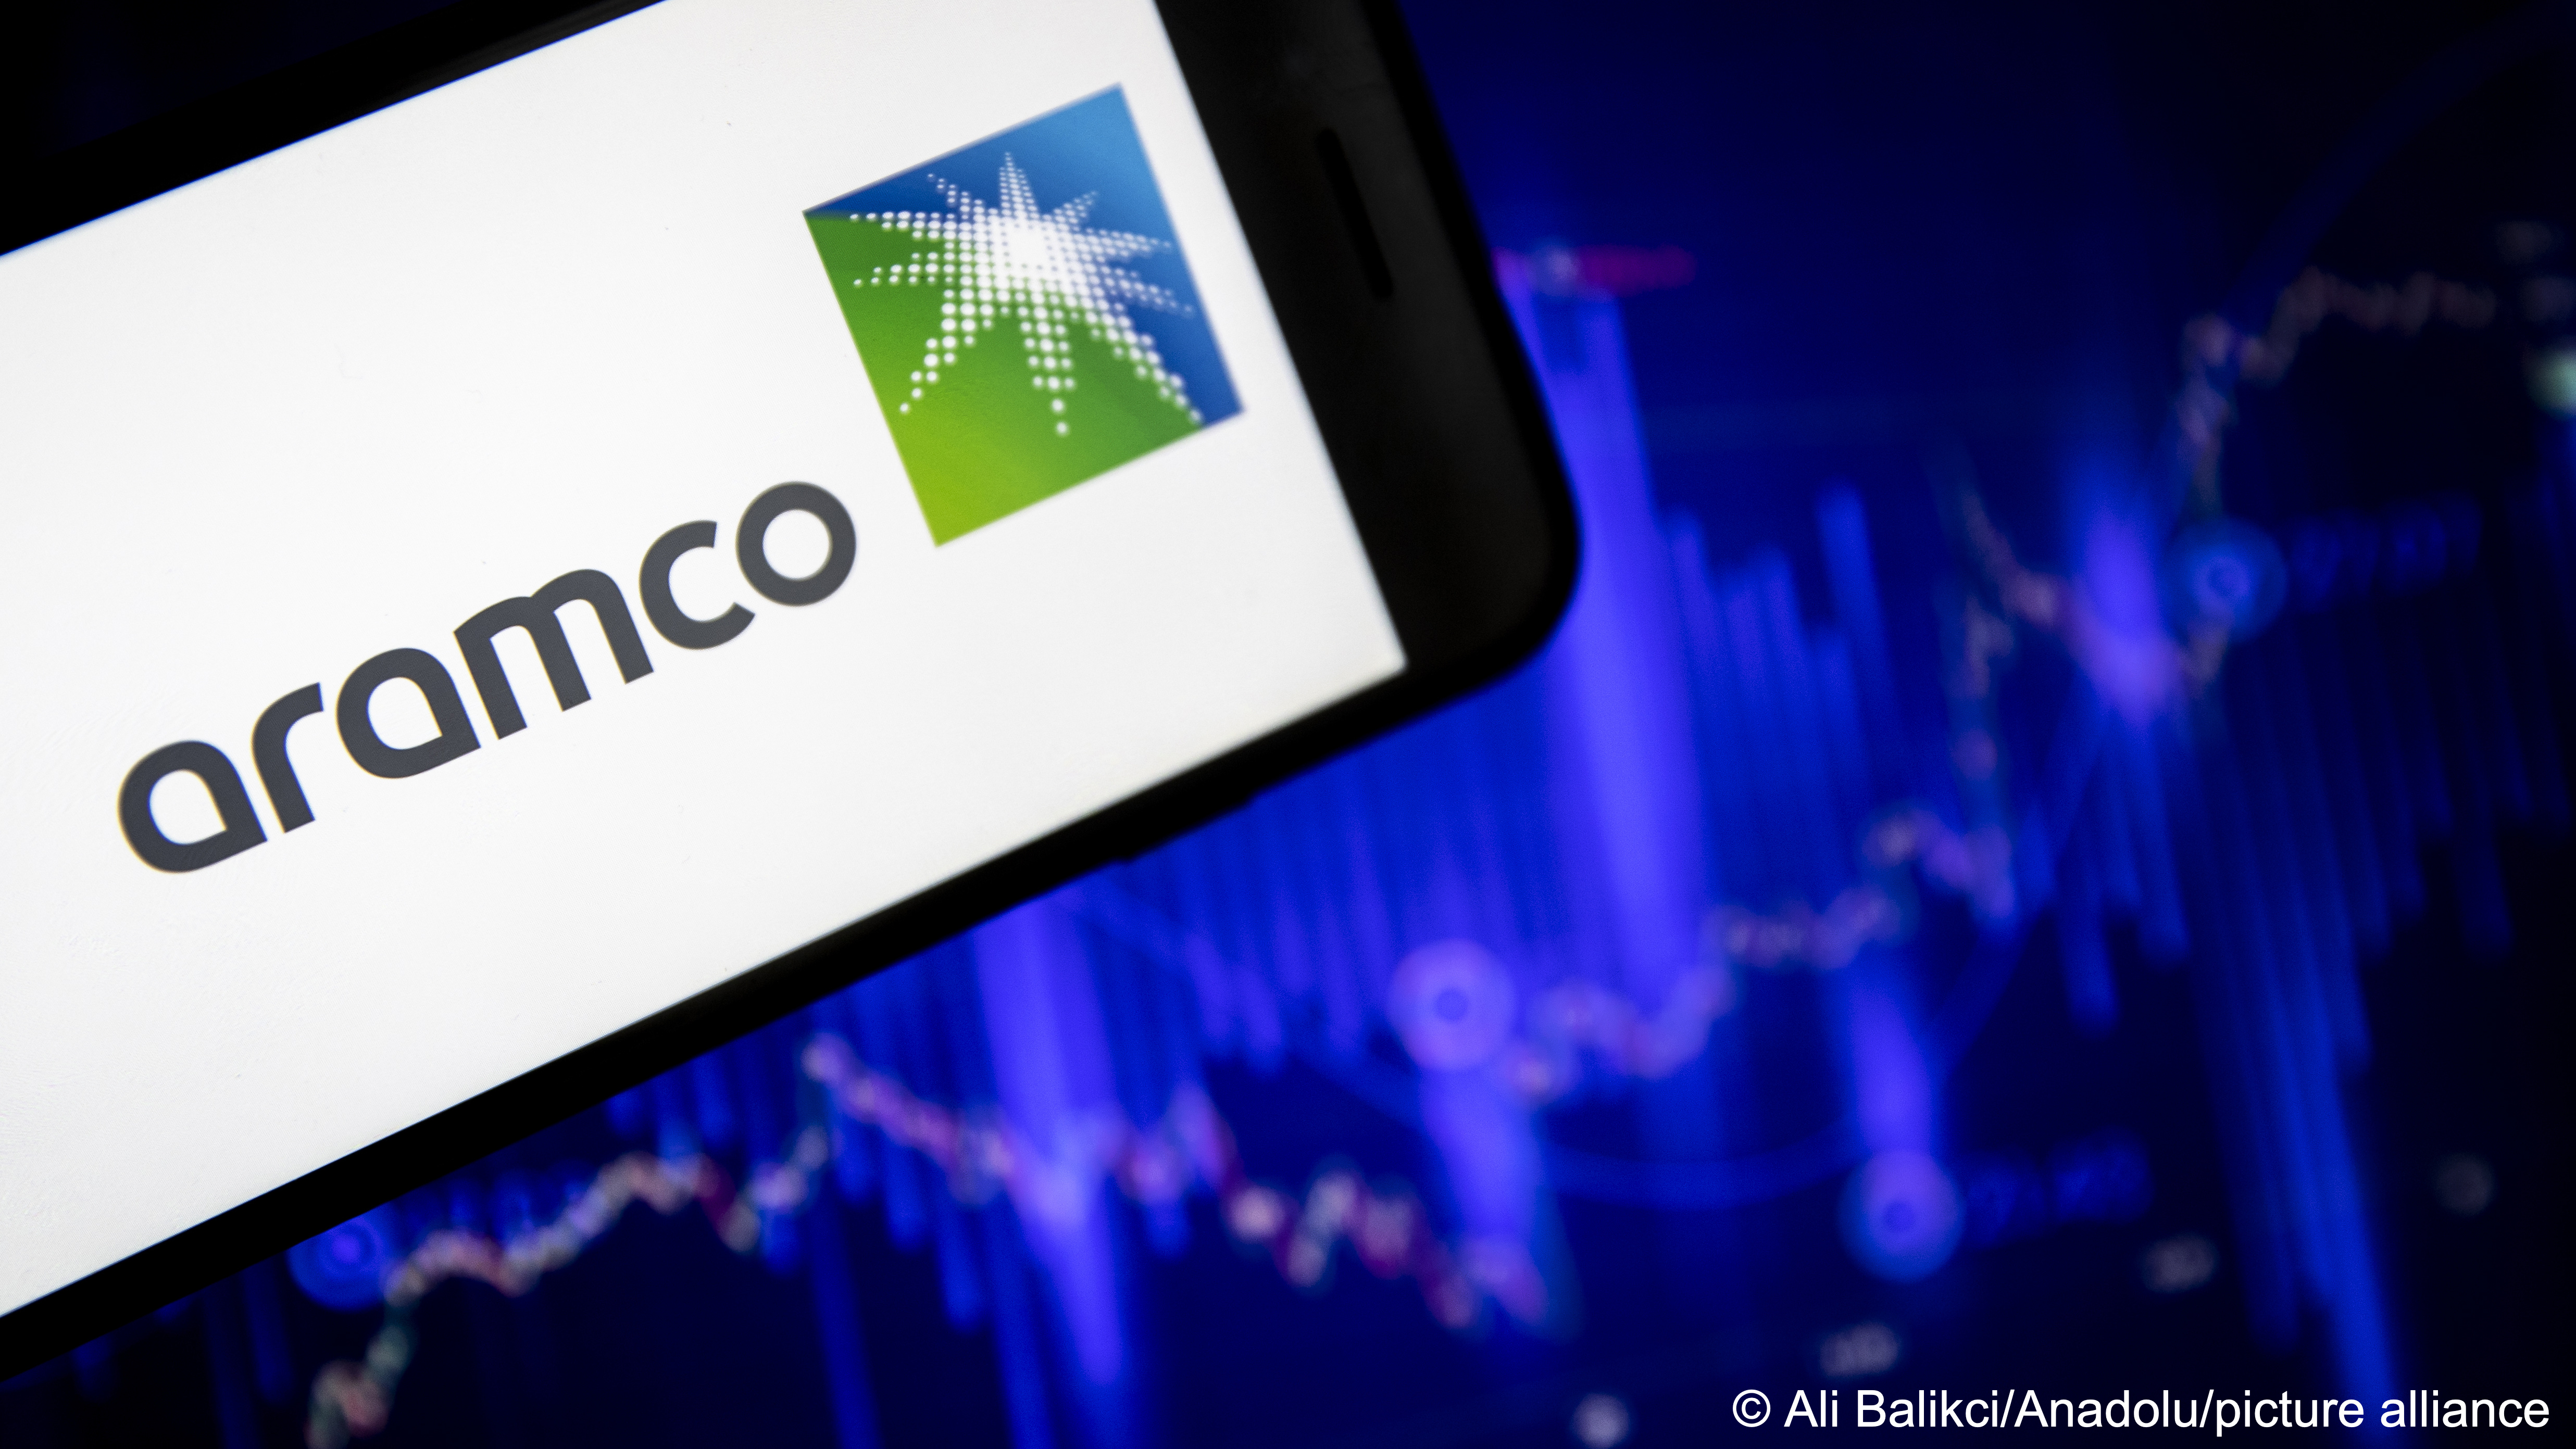 The logo of Saudi Aramco, the national oil and gas company of Saudi Arabia, is displayed on a mobile phone screen in front of a financial stock market graph